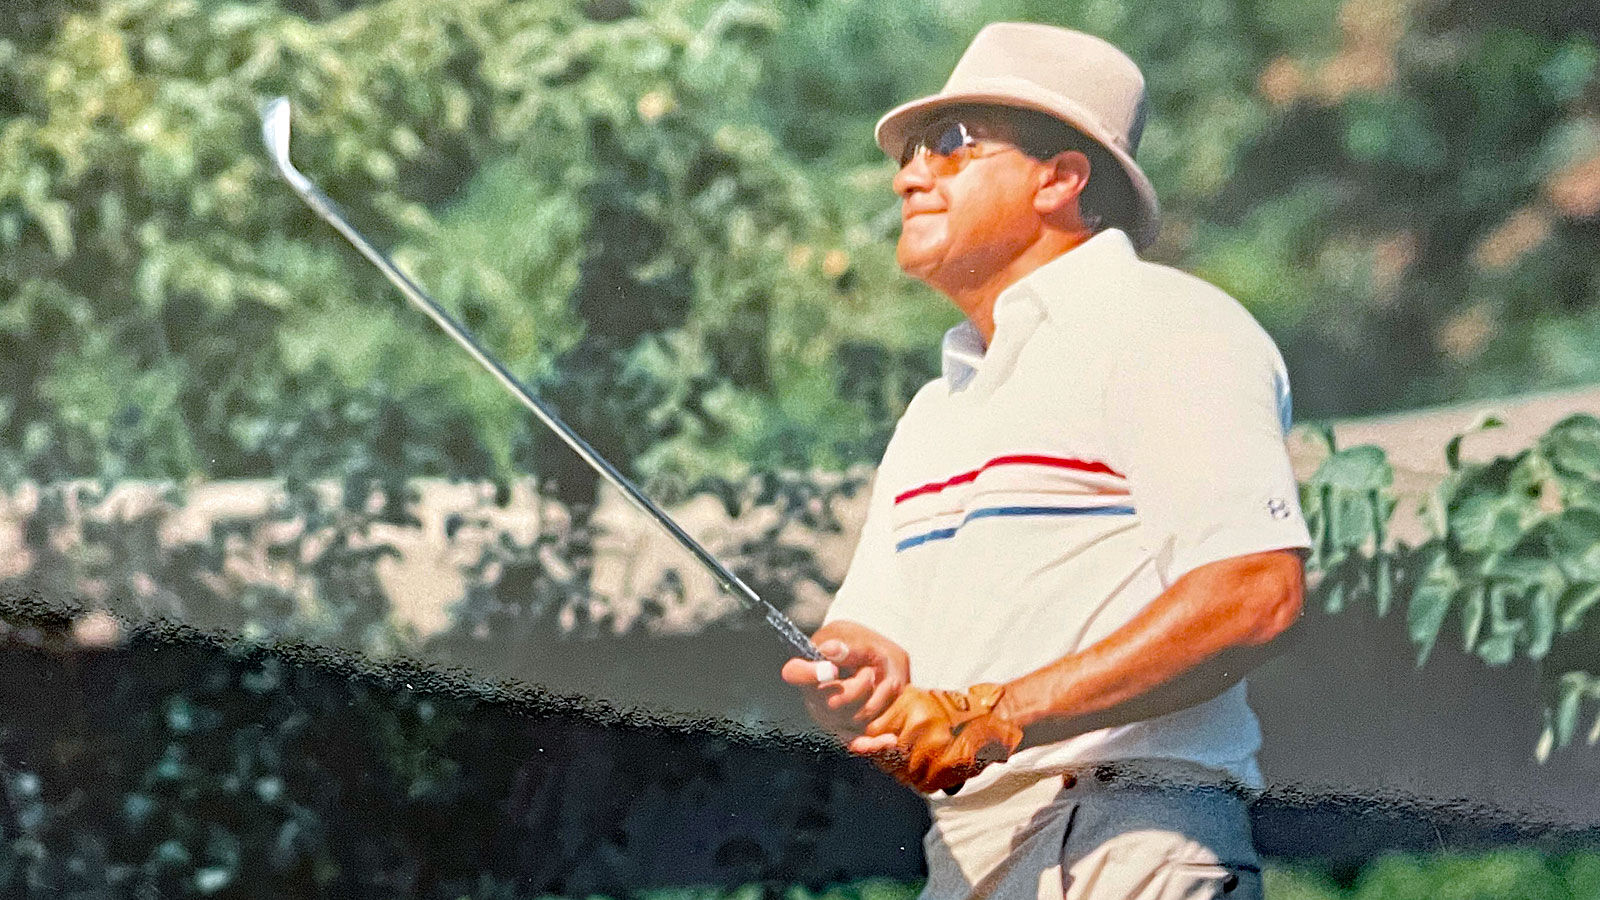 Were all gifted in some way Carl Unis achievements as a player, teacher and administrator have been a gift to golf Gary DAmato wisconsin.golf